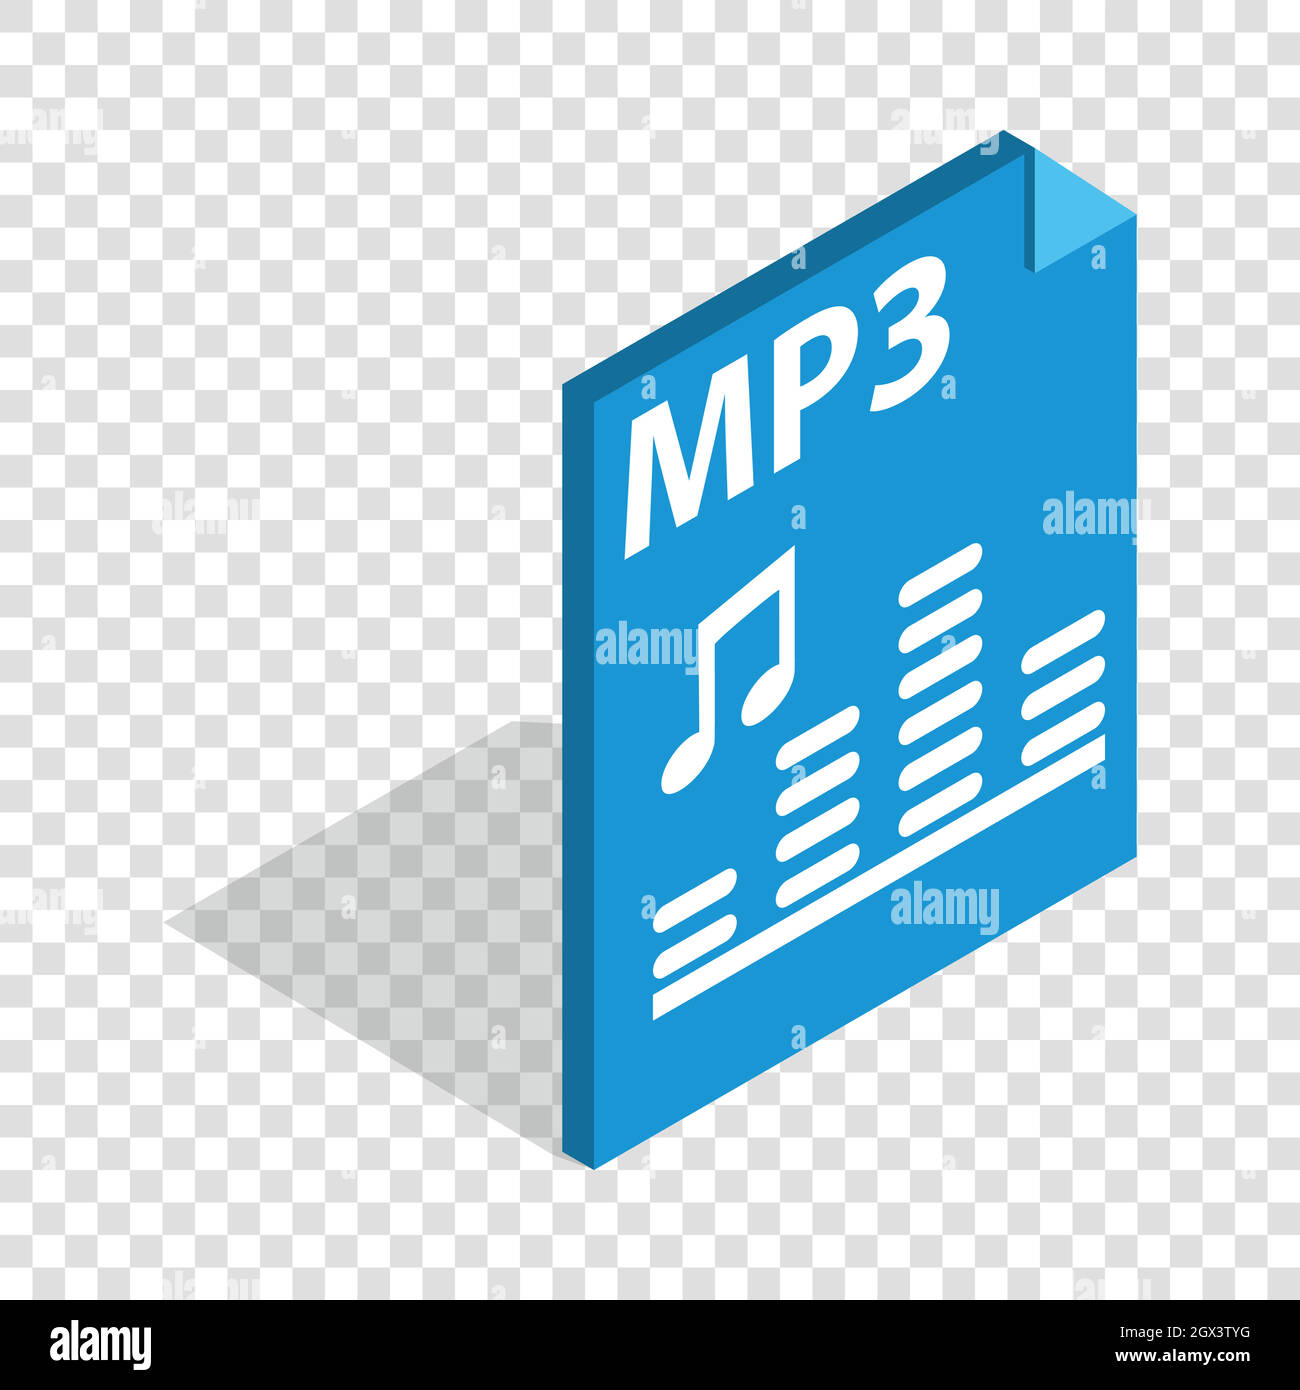 MP3 file format isometric icon Stock Vector